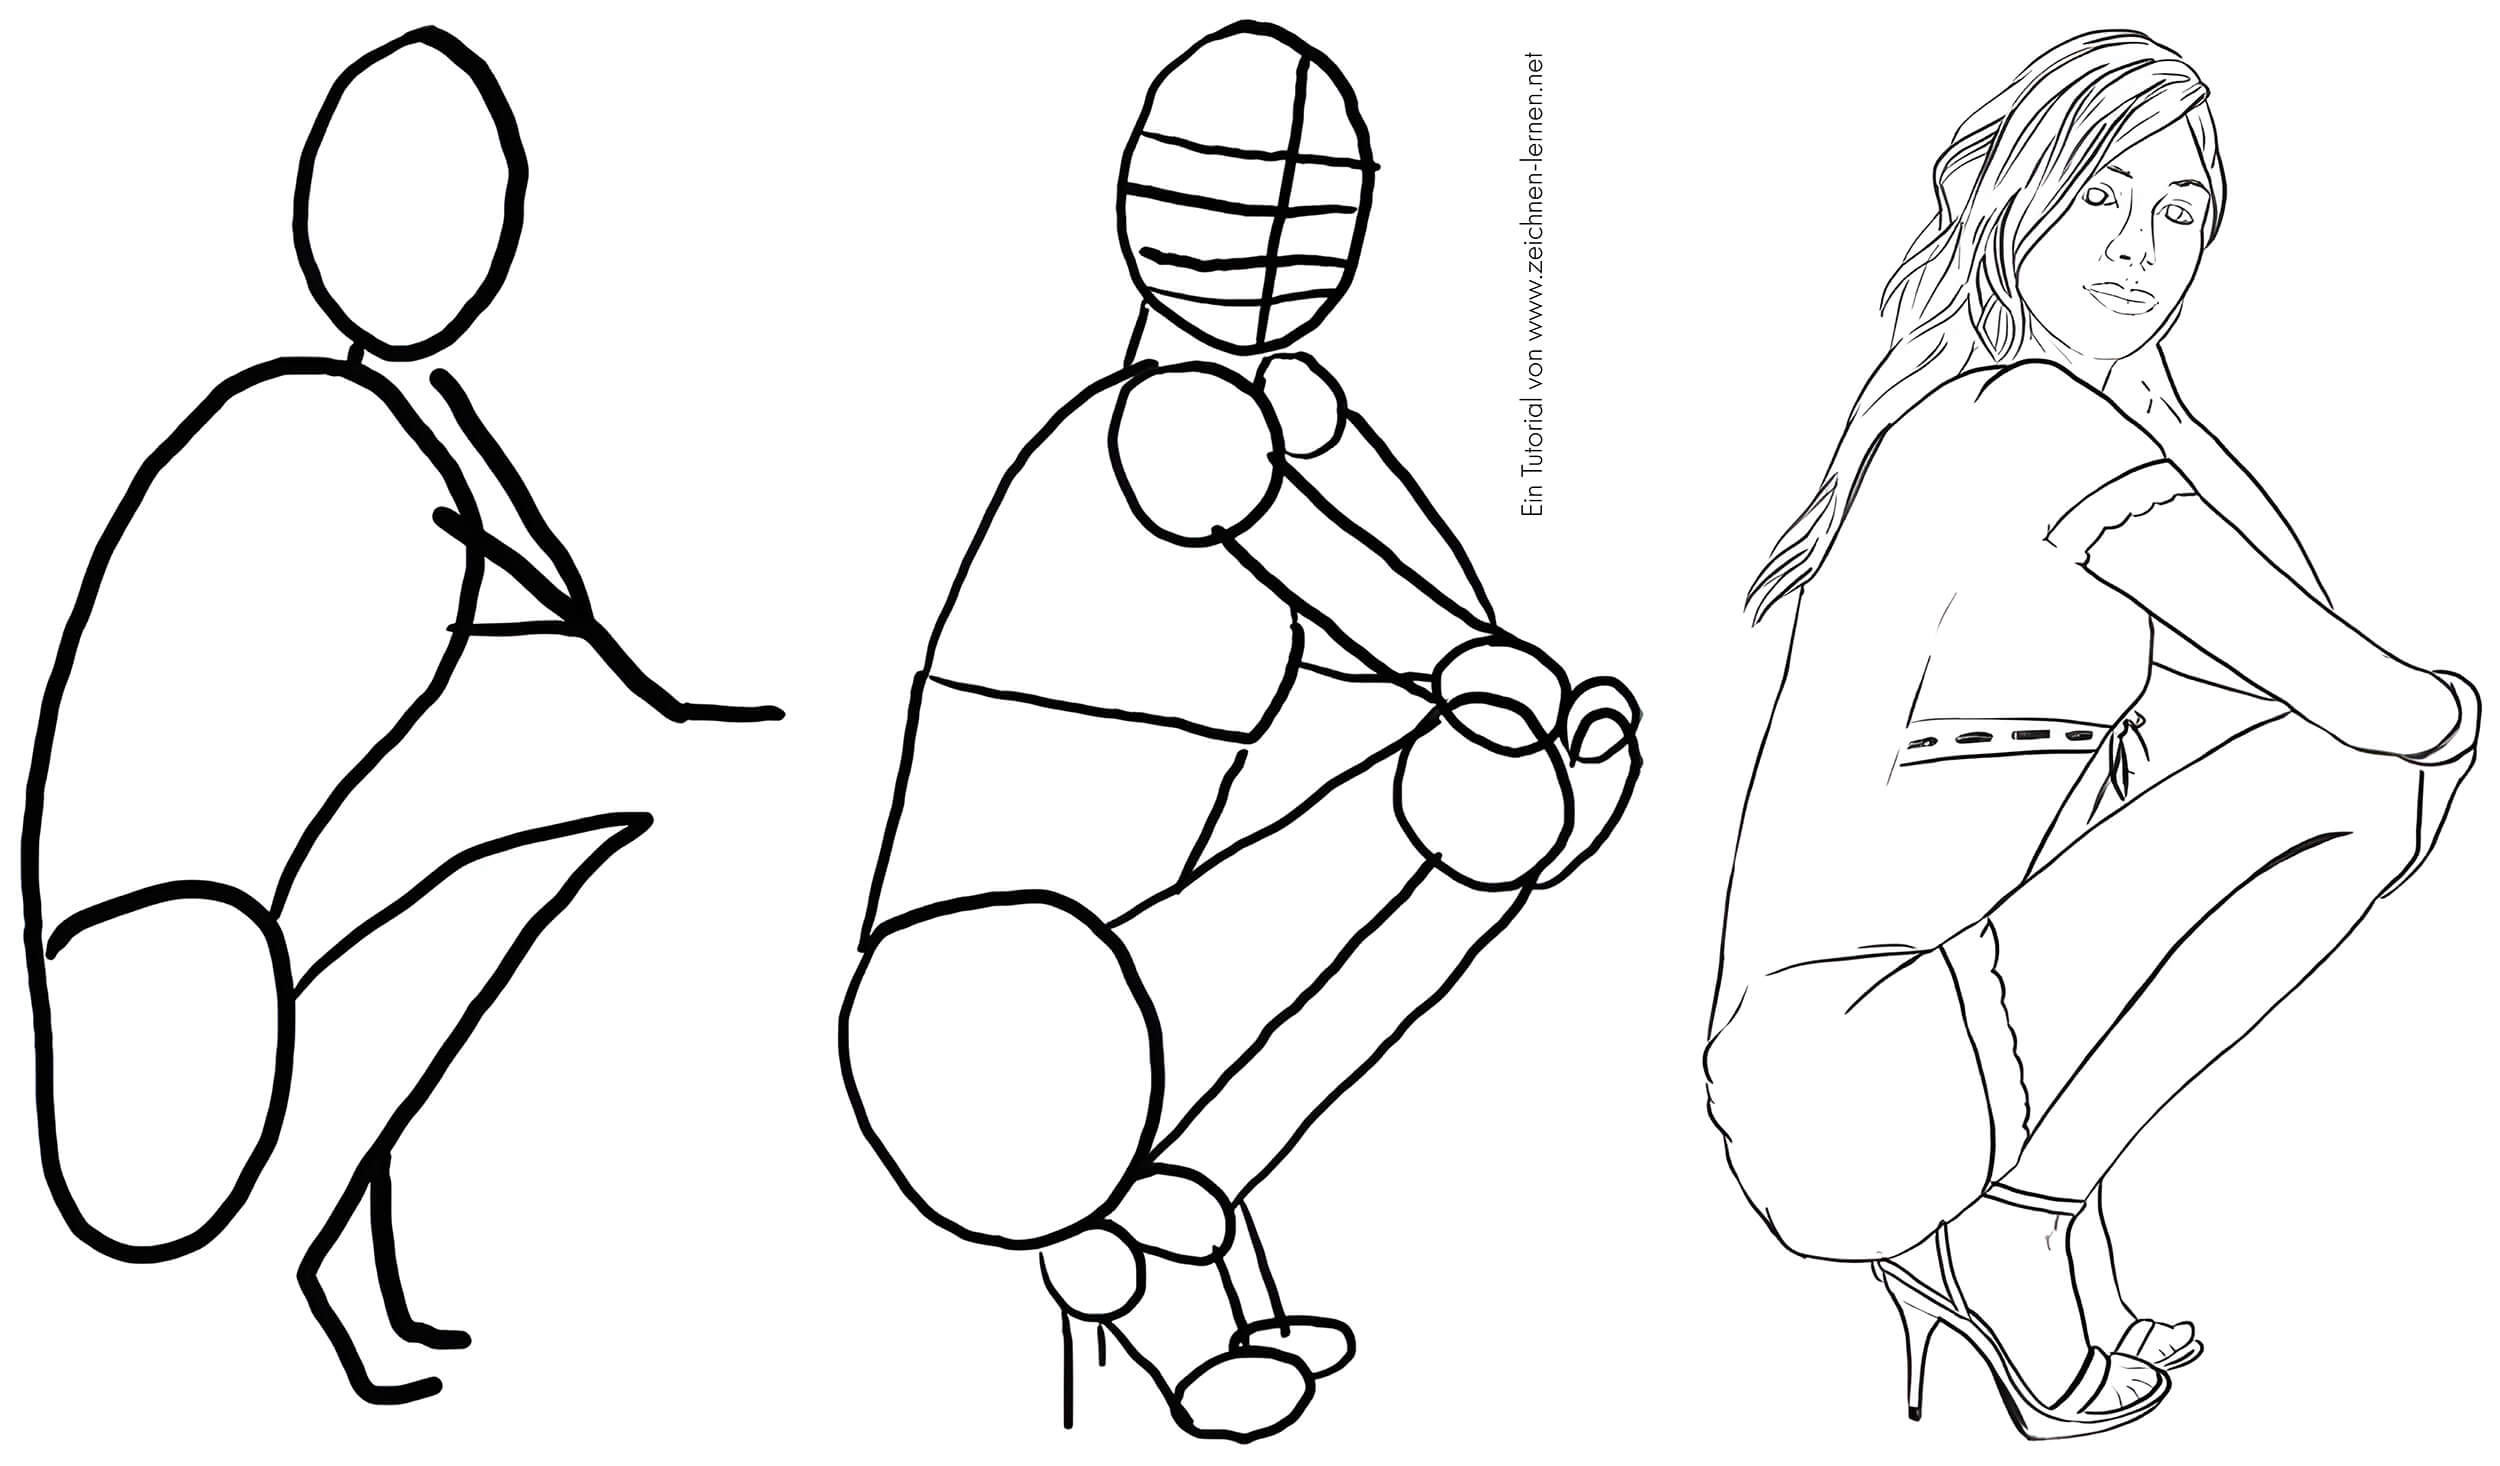 Coloring page for adults of a elegant fa...